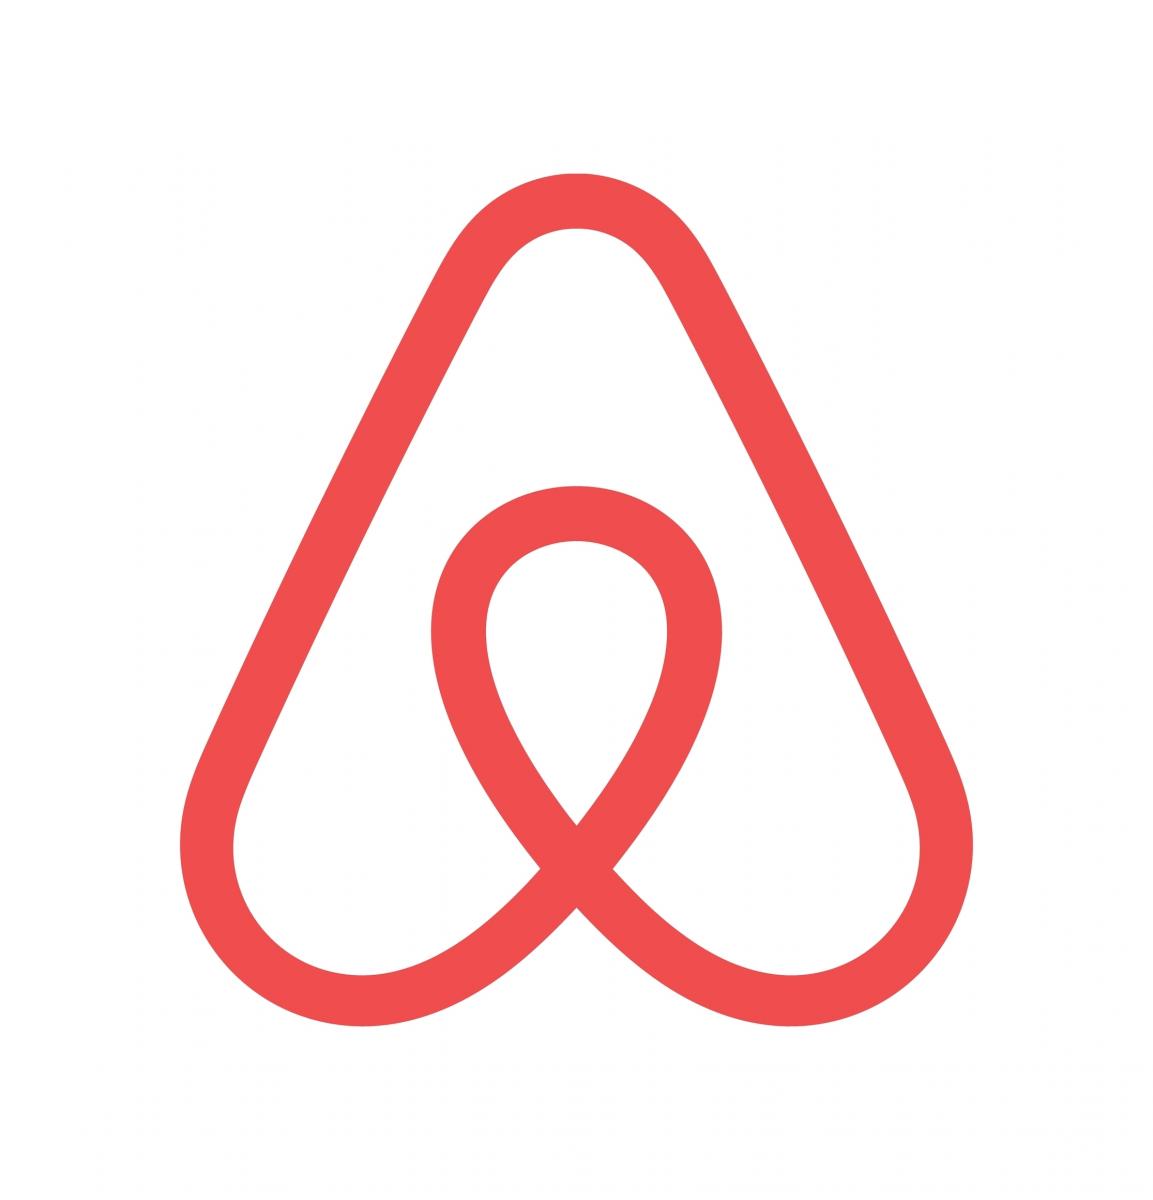 Airbnb may offer long-term rentals, not just short lets